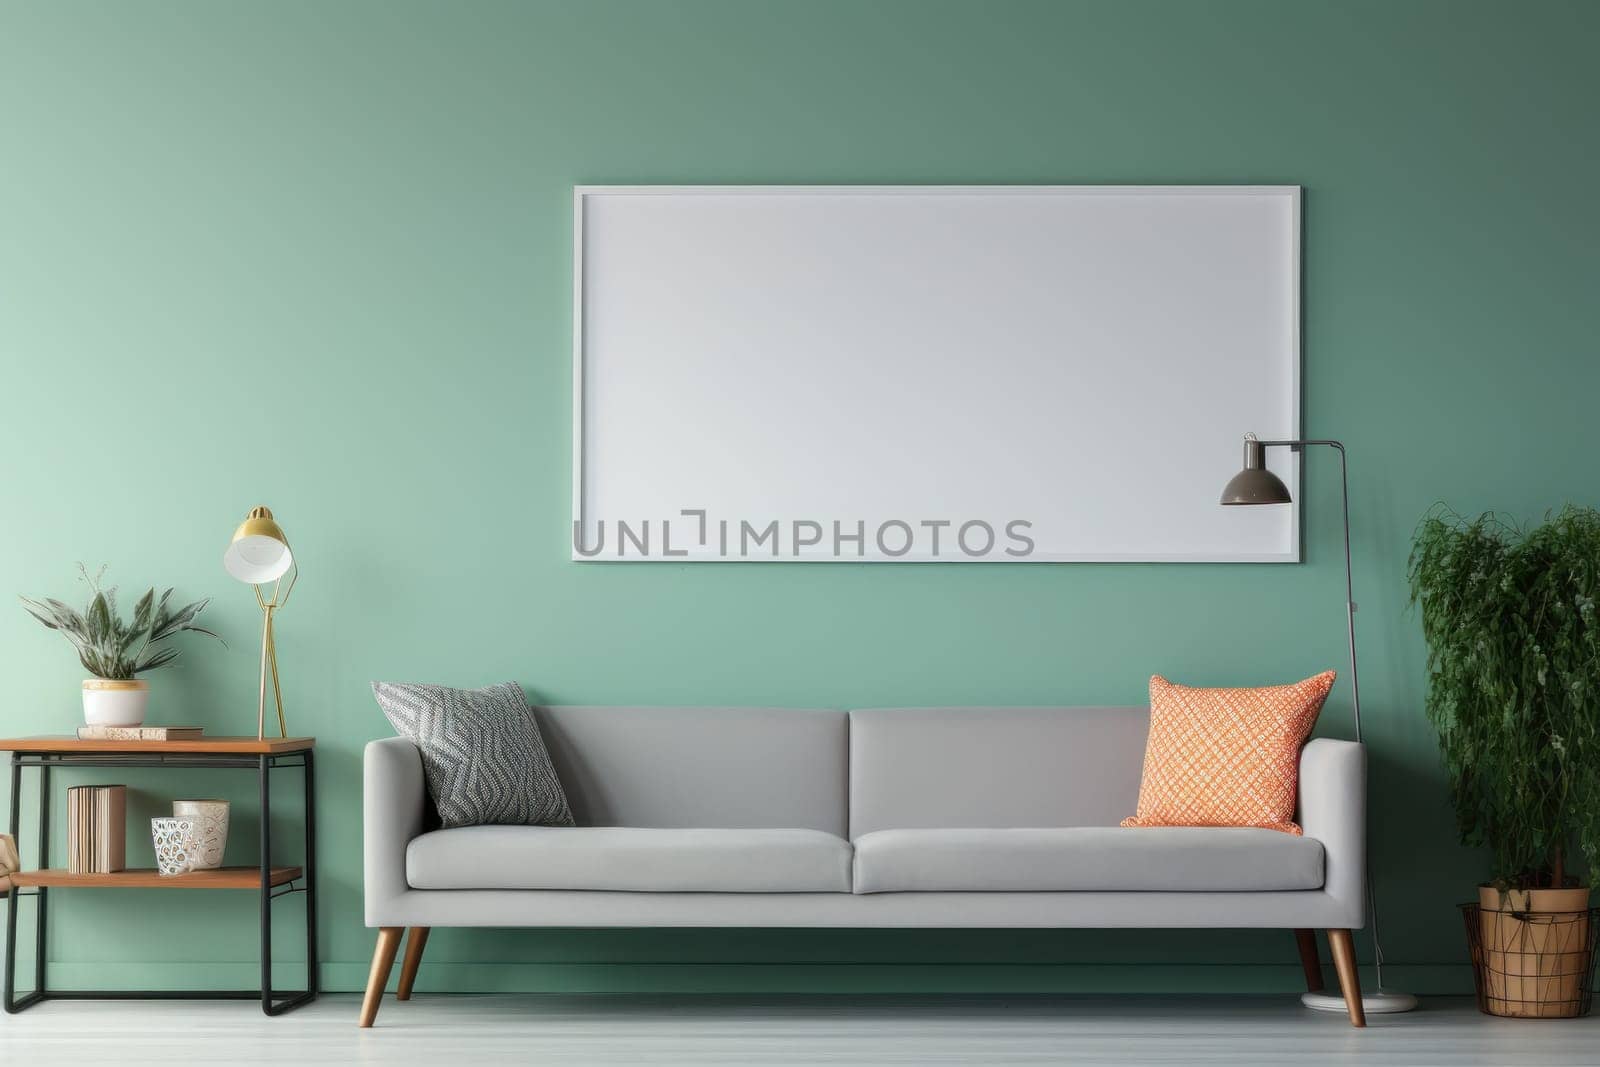 Photo frame on wall with sofa and living room setting. by prathanchorruangsak